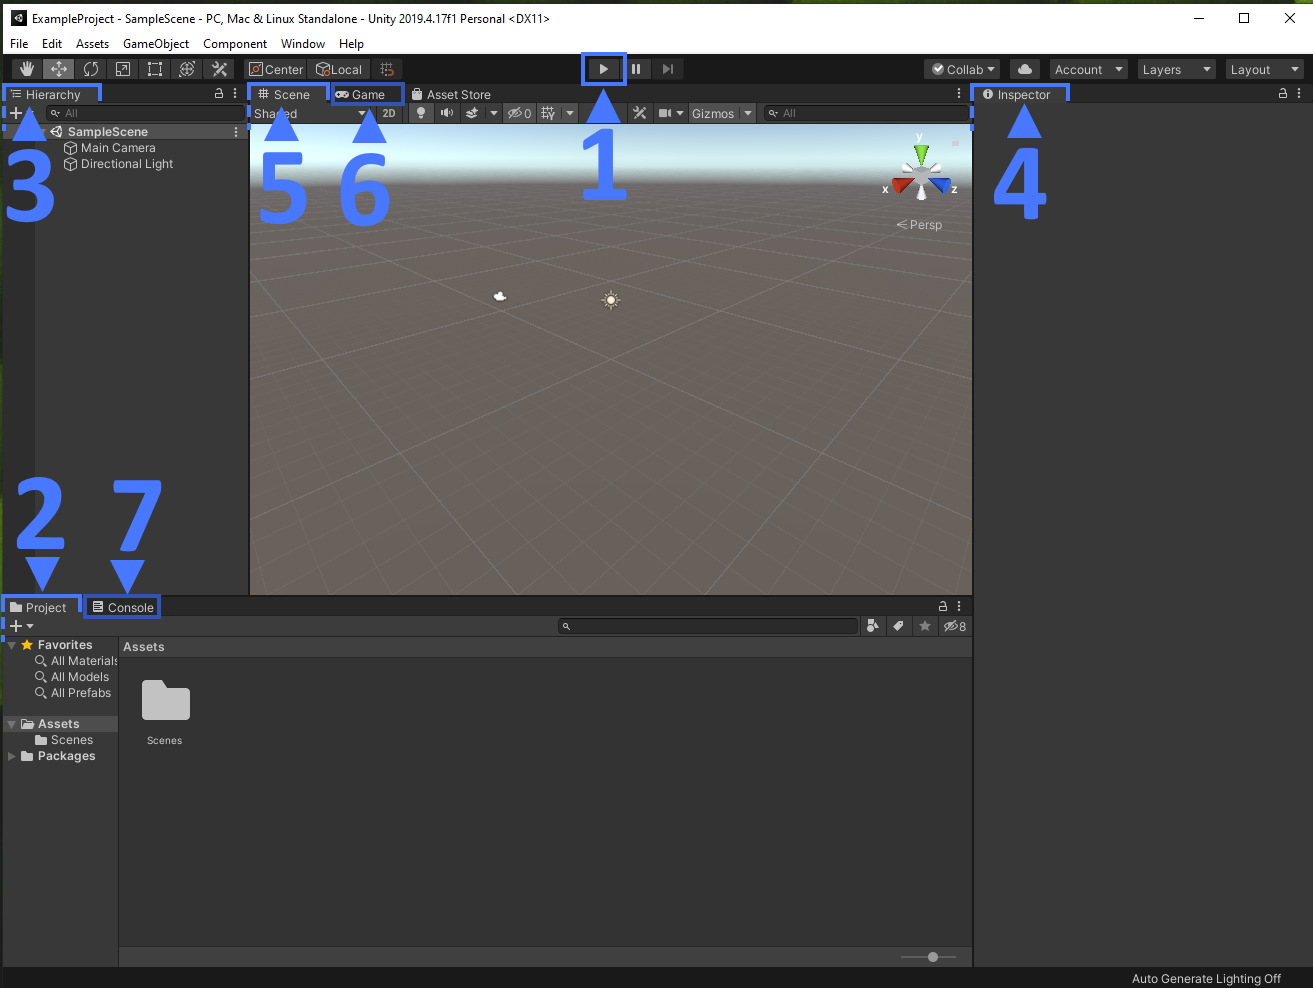 Default unity view with 7 specific areas indicated